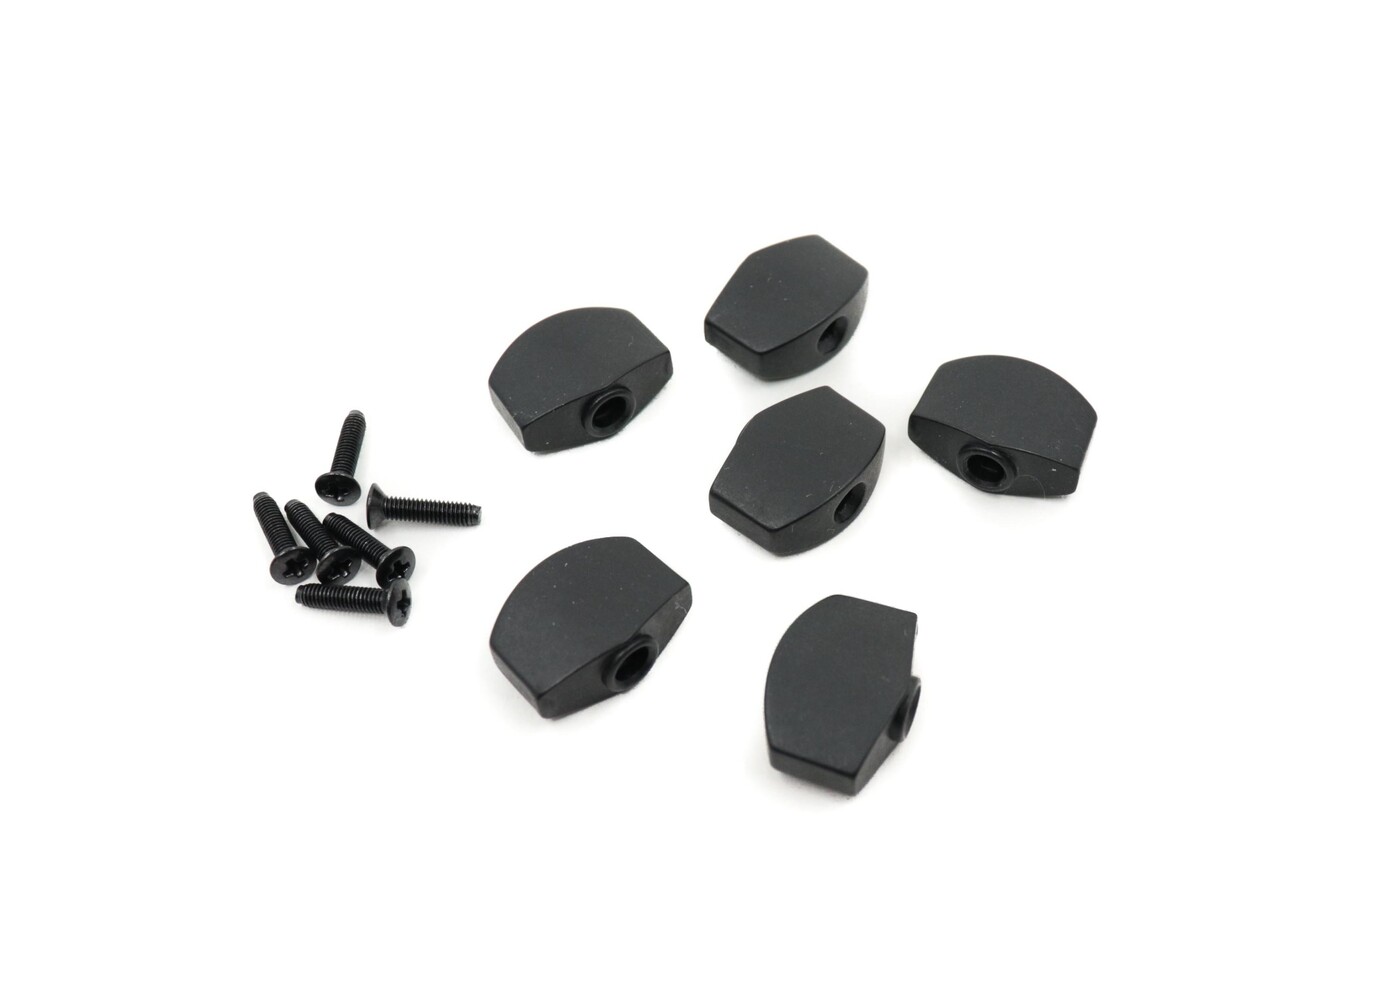 MannMade USA MannMade USA Tuner Buttons, Small - Black